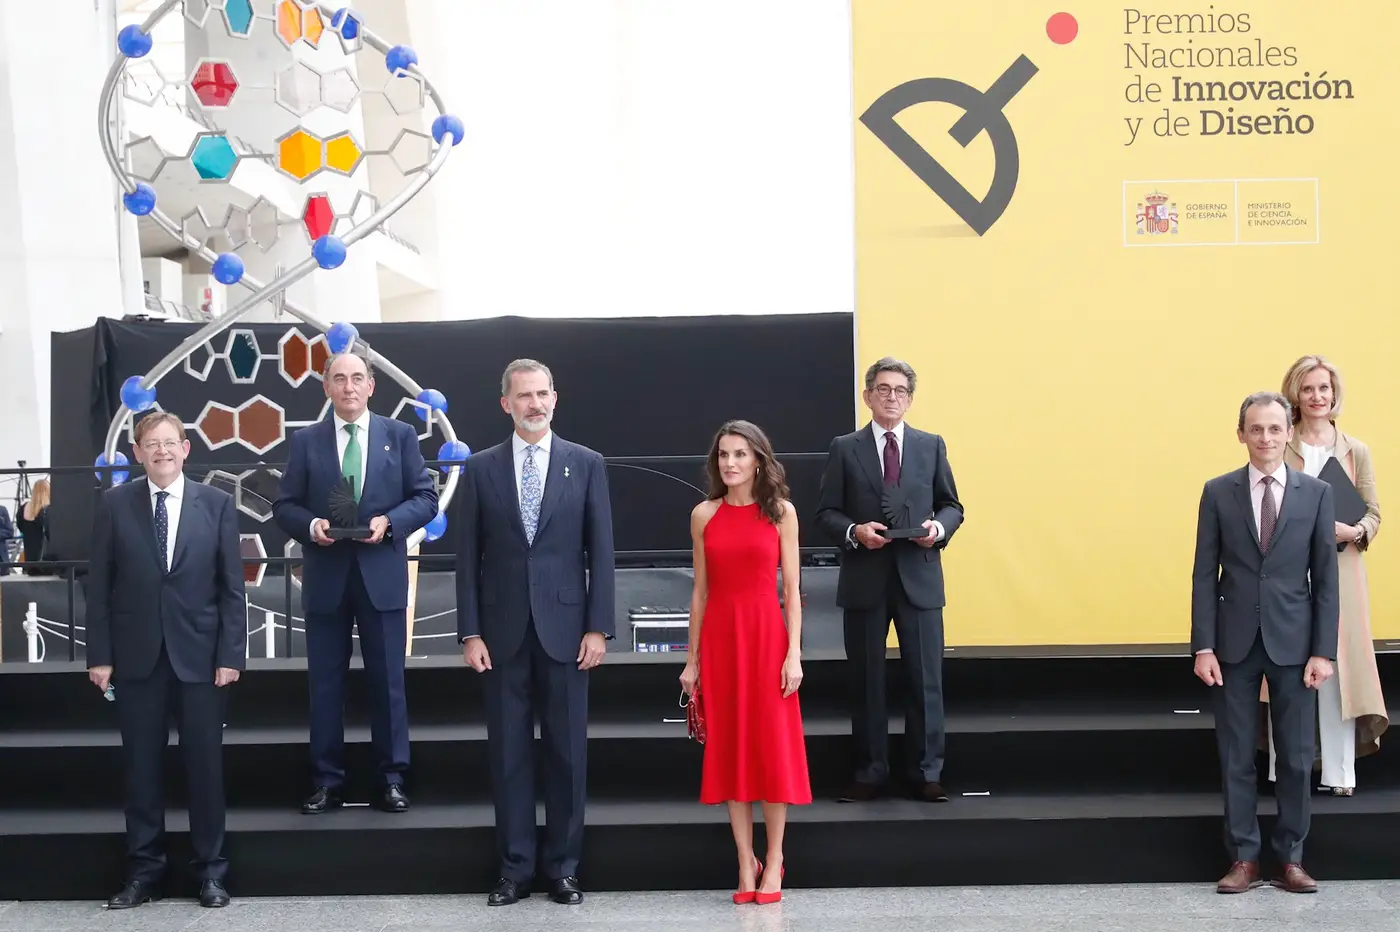 King Felipe and Queen Letizia of Spain preside over the delivery of the Innovation and Design Awards 2019 in Valencia